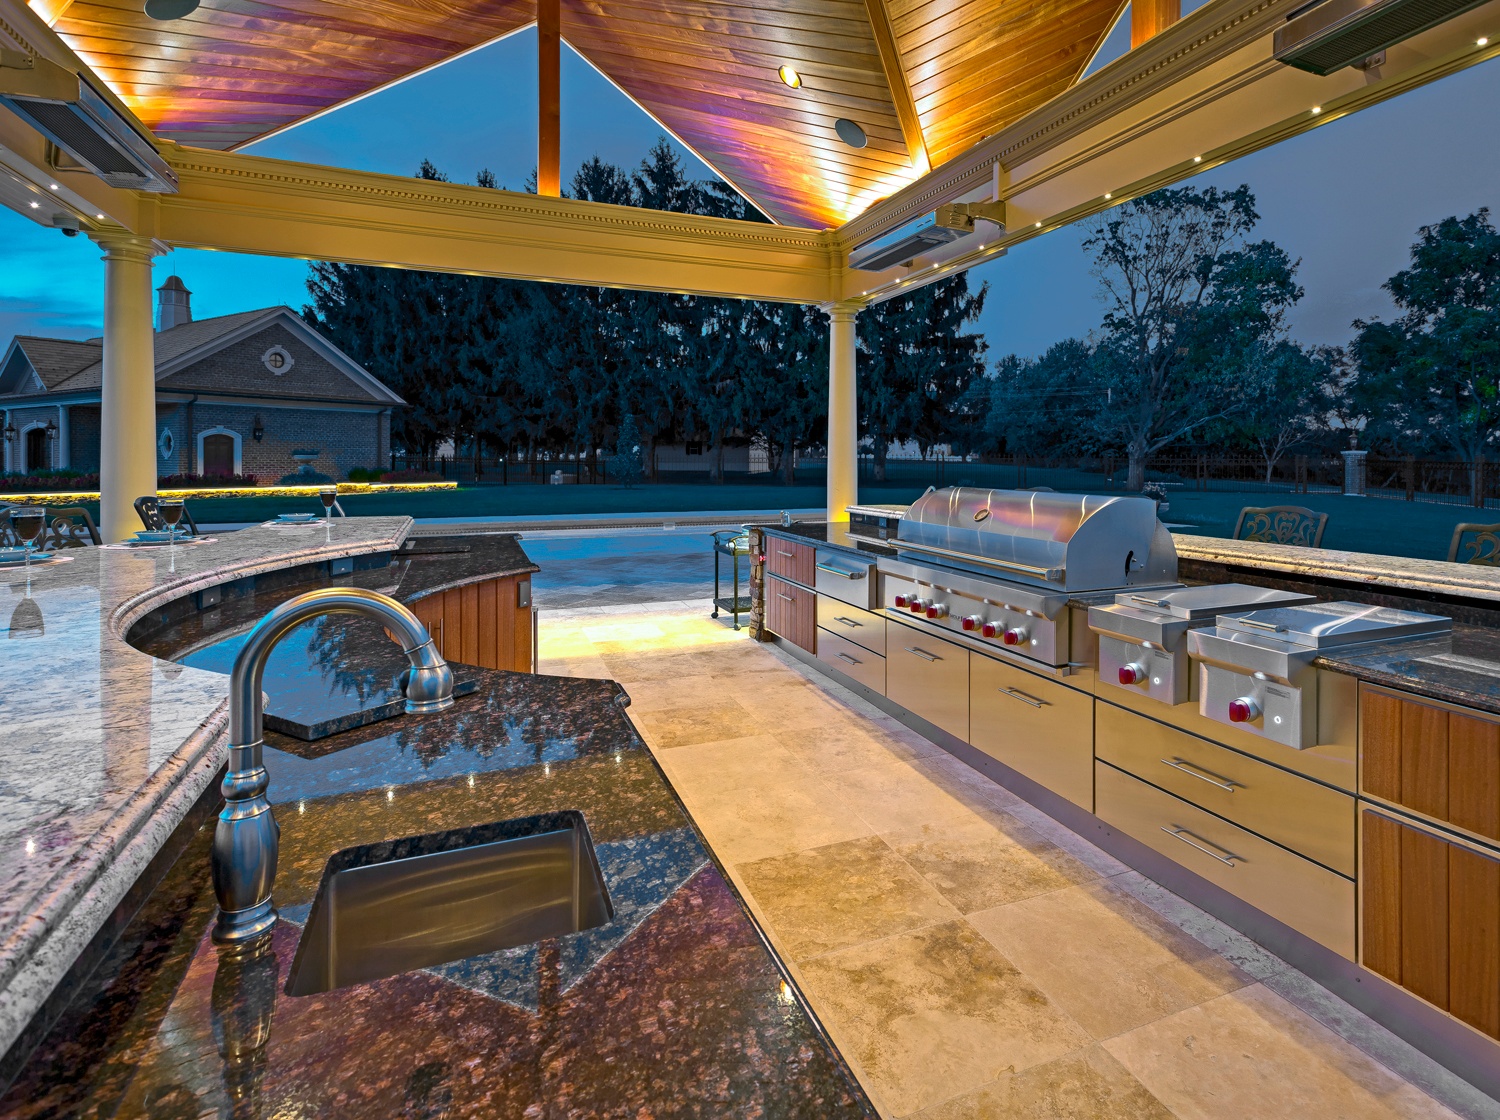 9 of the Coolest Outdoor Kitchen Appliances We've Installed